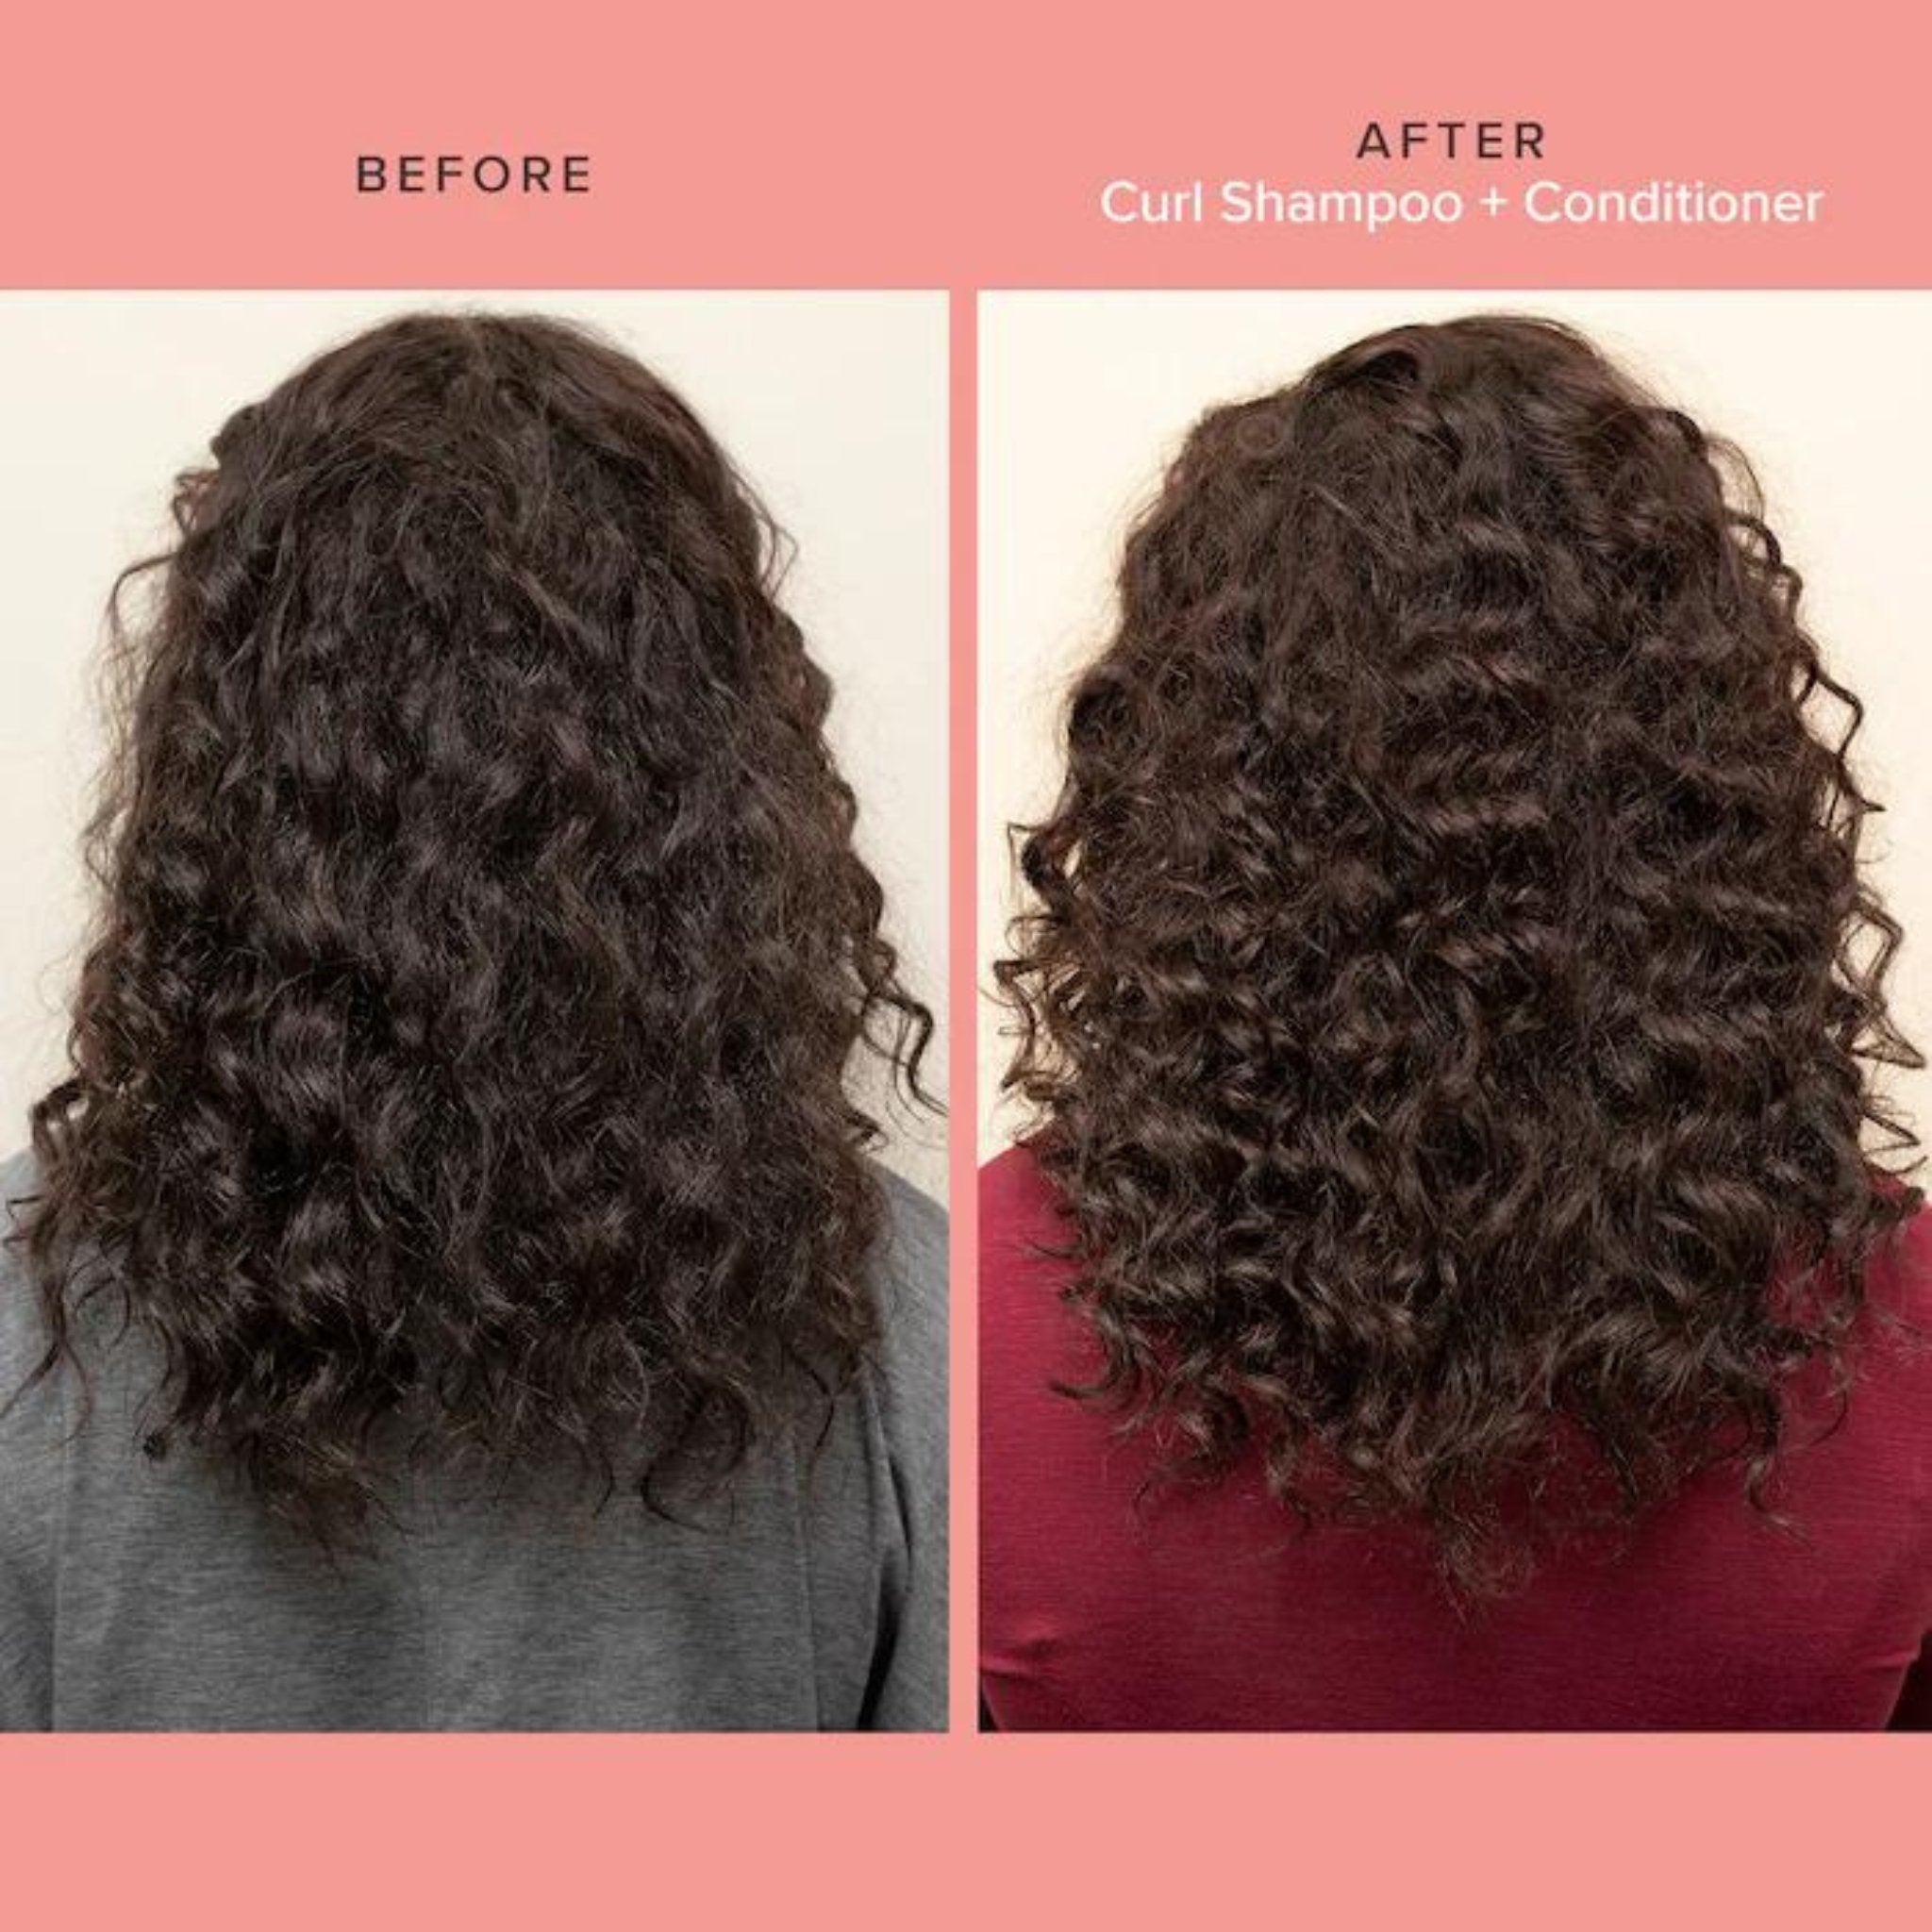 Living Proof. Shampoing Curl - 355 ml - Concept C. Shop